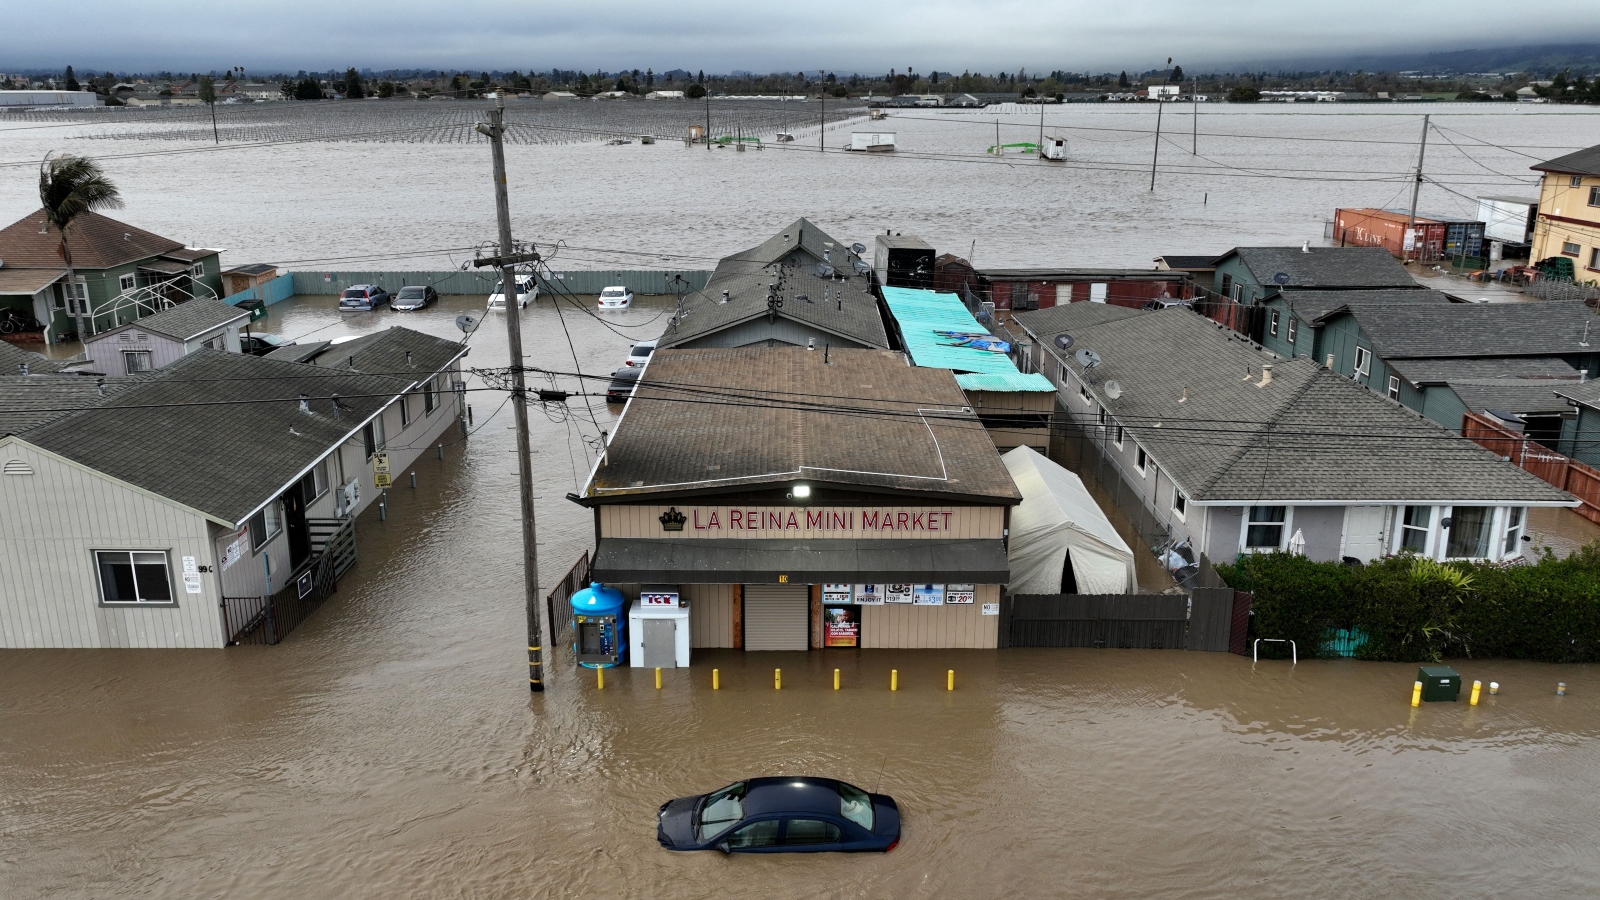 A car and market shop in floodwaters in Pajaro, California.